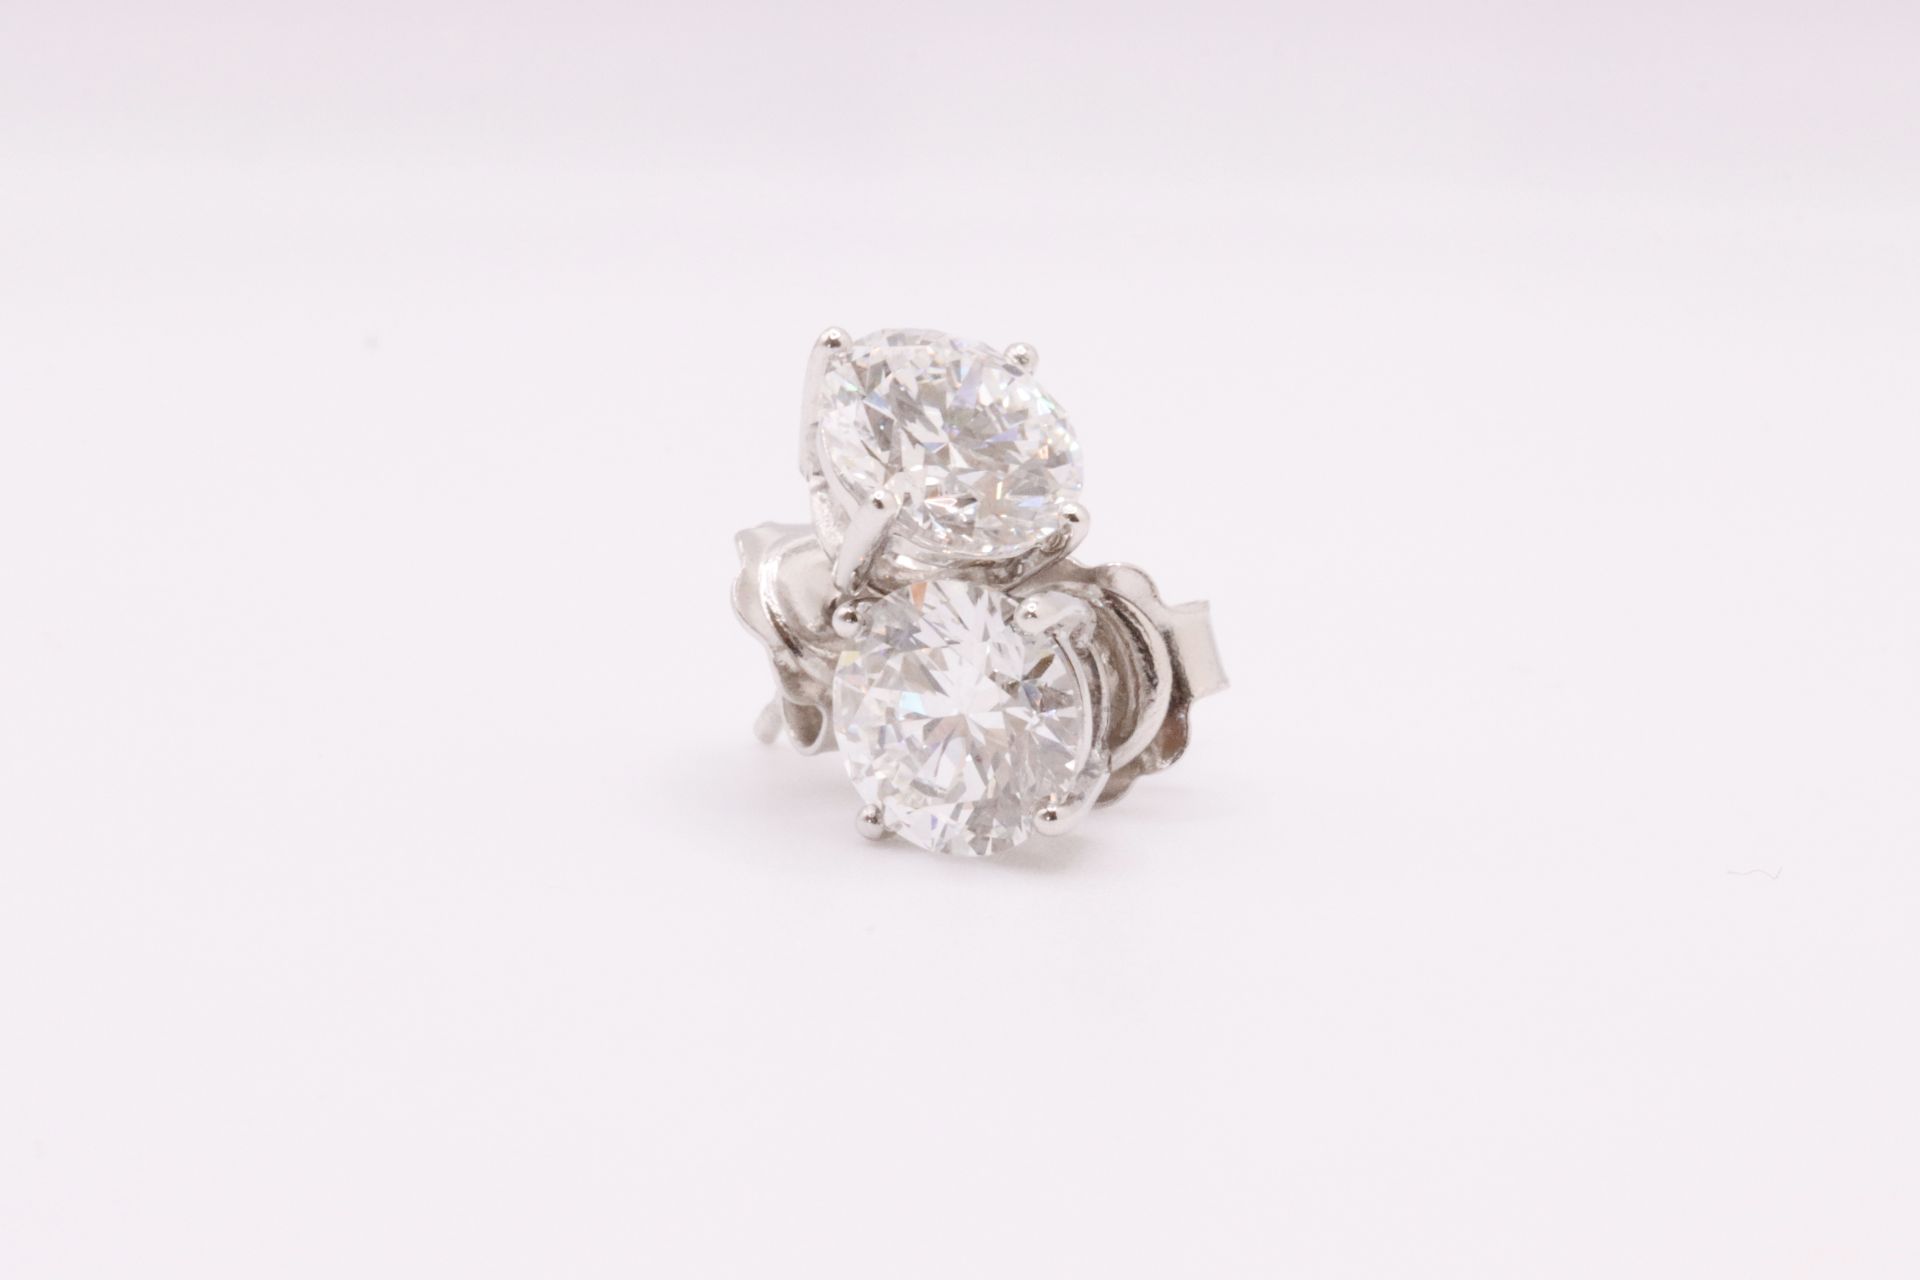 ** ON SALE ** Round Brilliant Cut 2.00 Carat Diamond Earrings Set in 18kt White Gold - F Colour VVS2 - Image 2 of 5